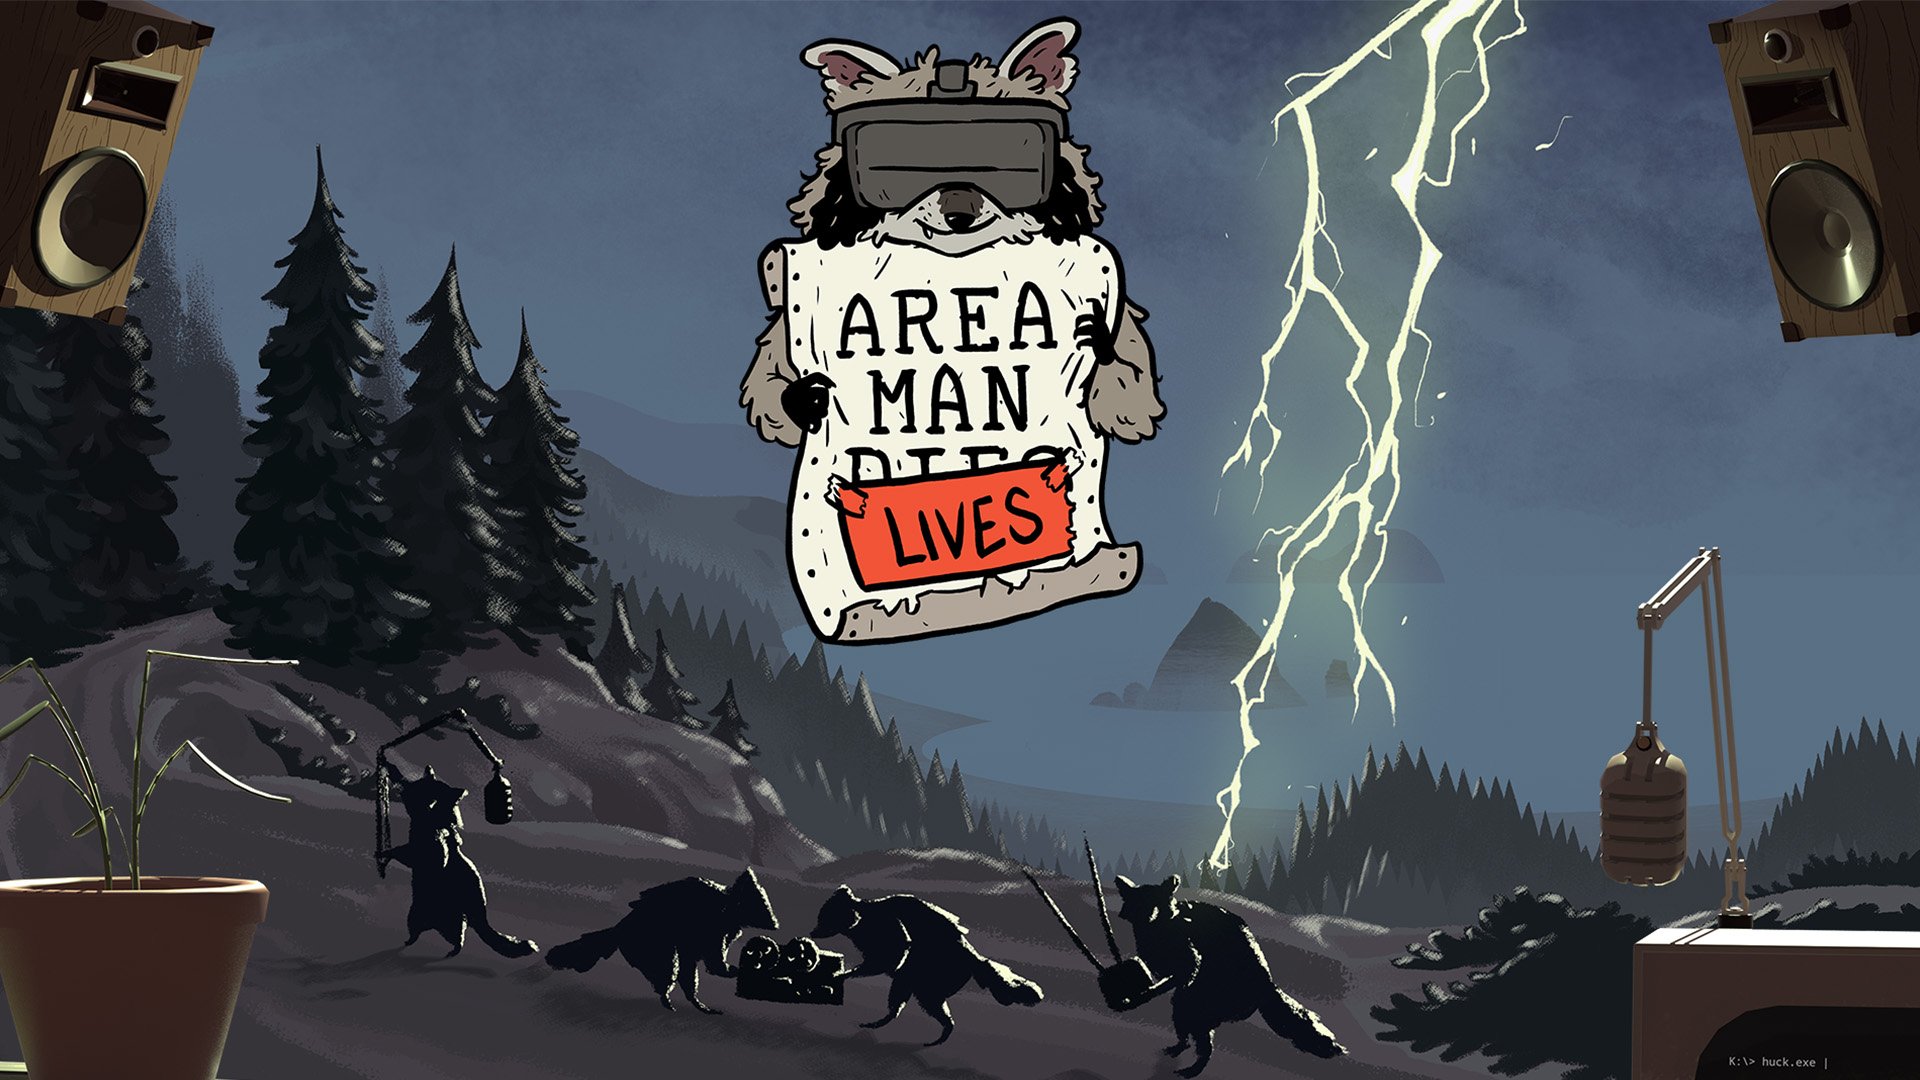 Featured image for “Area Man Lives”